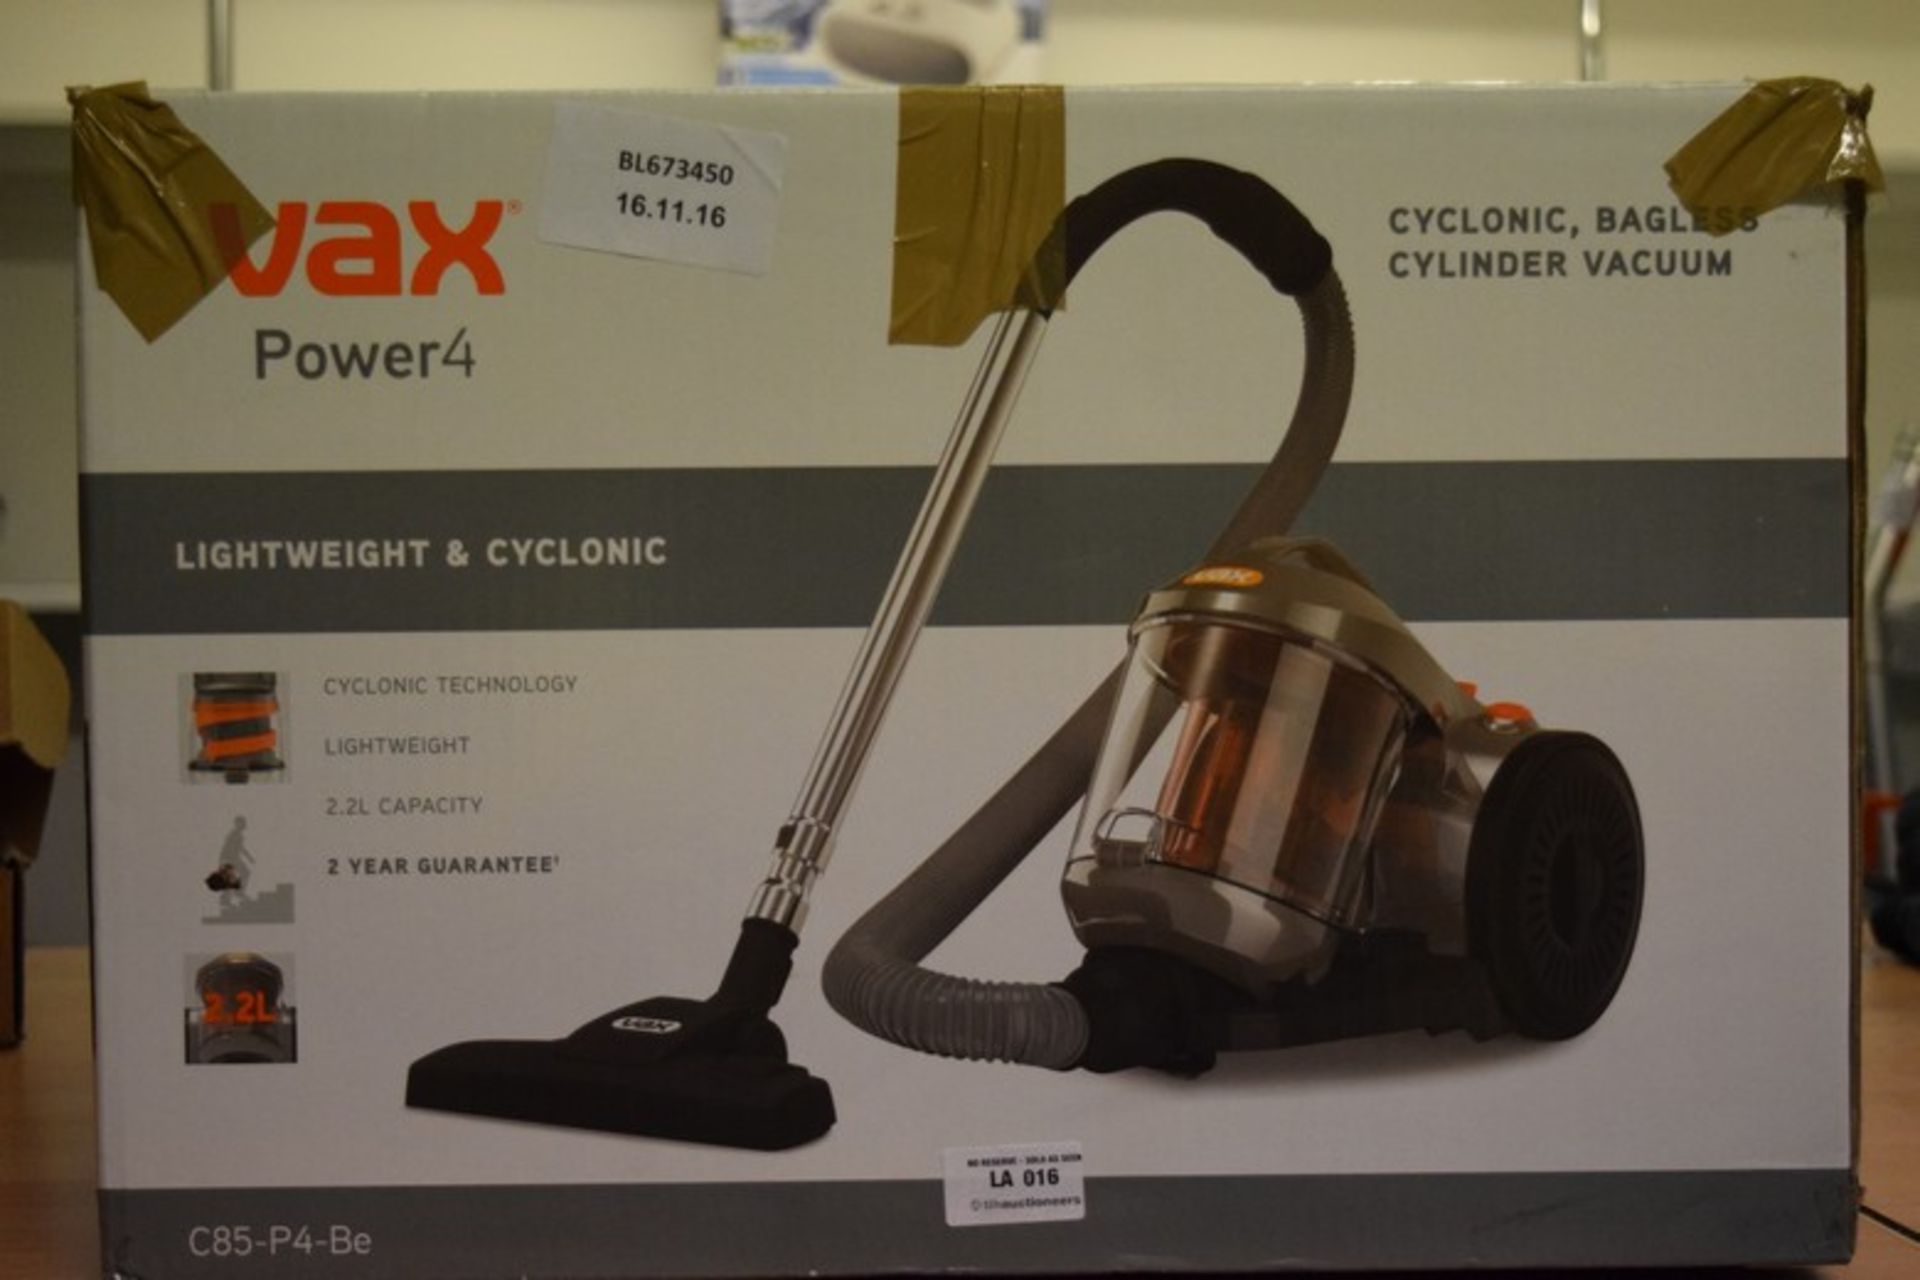 1 x BOXED VAX 4 LIGHTWEIGHT CYCLONE COMPACT VACUUM CLEANER RRP £60 16/11/16 *PLEASE NOTE THAT THE